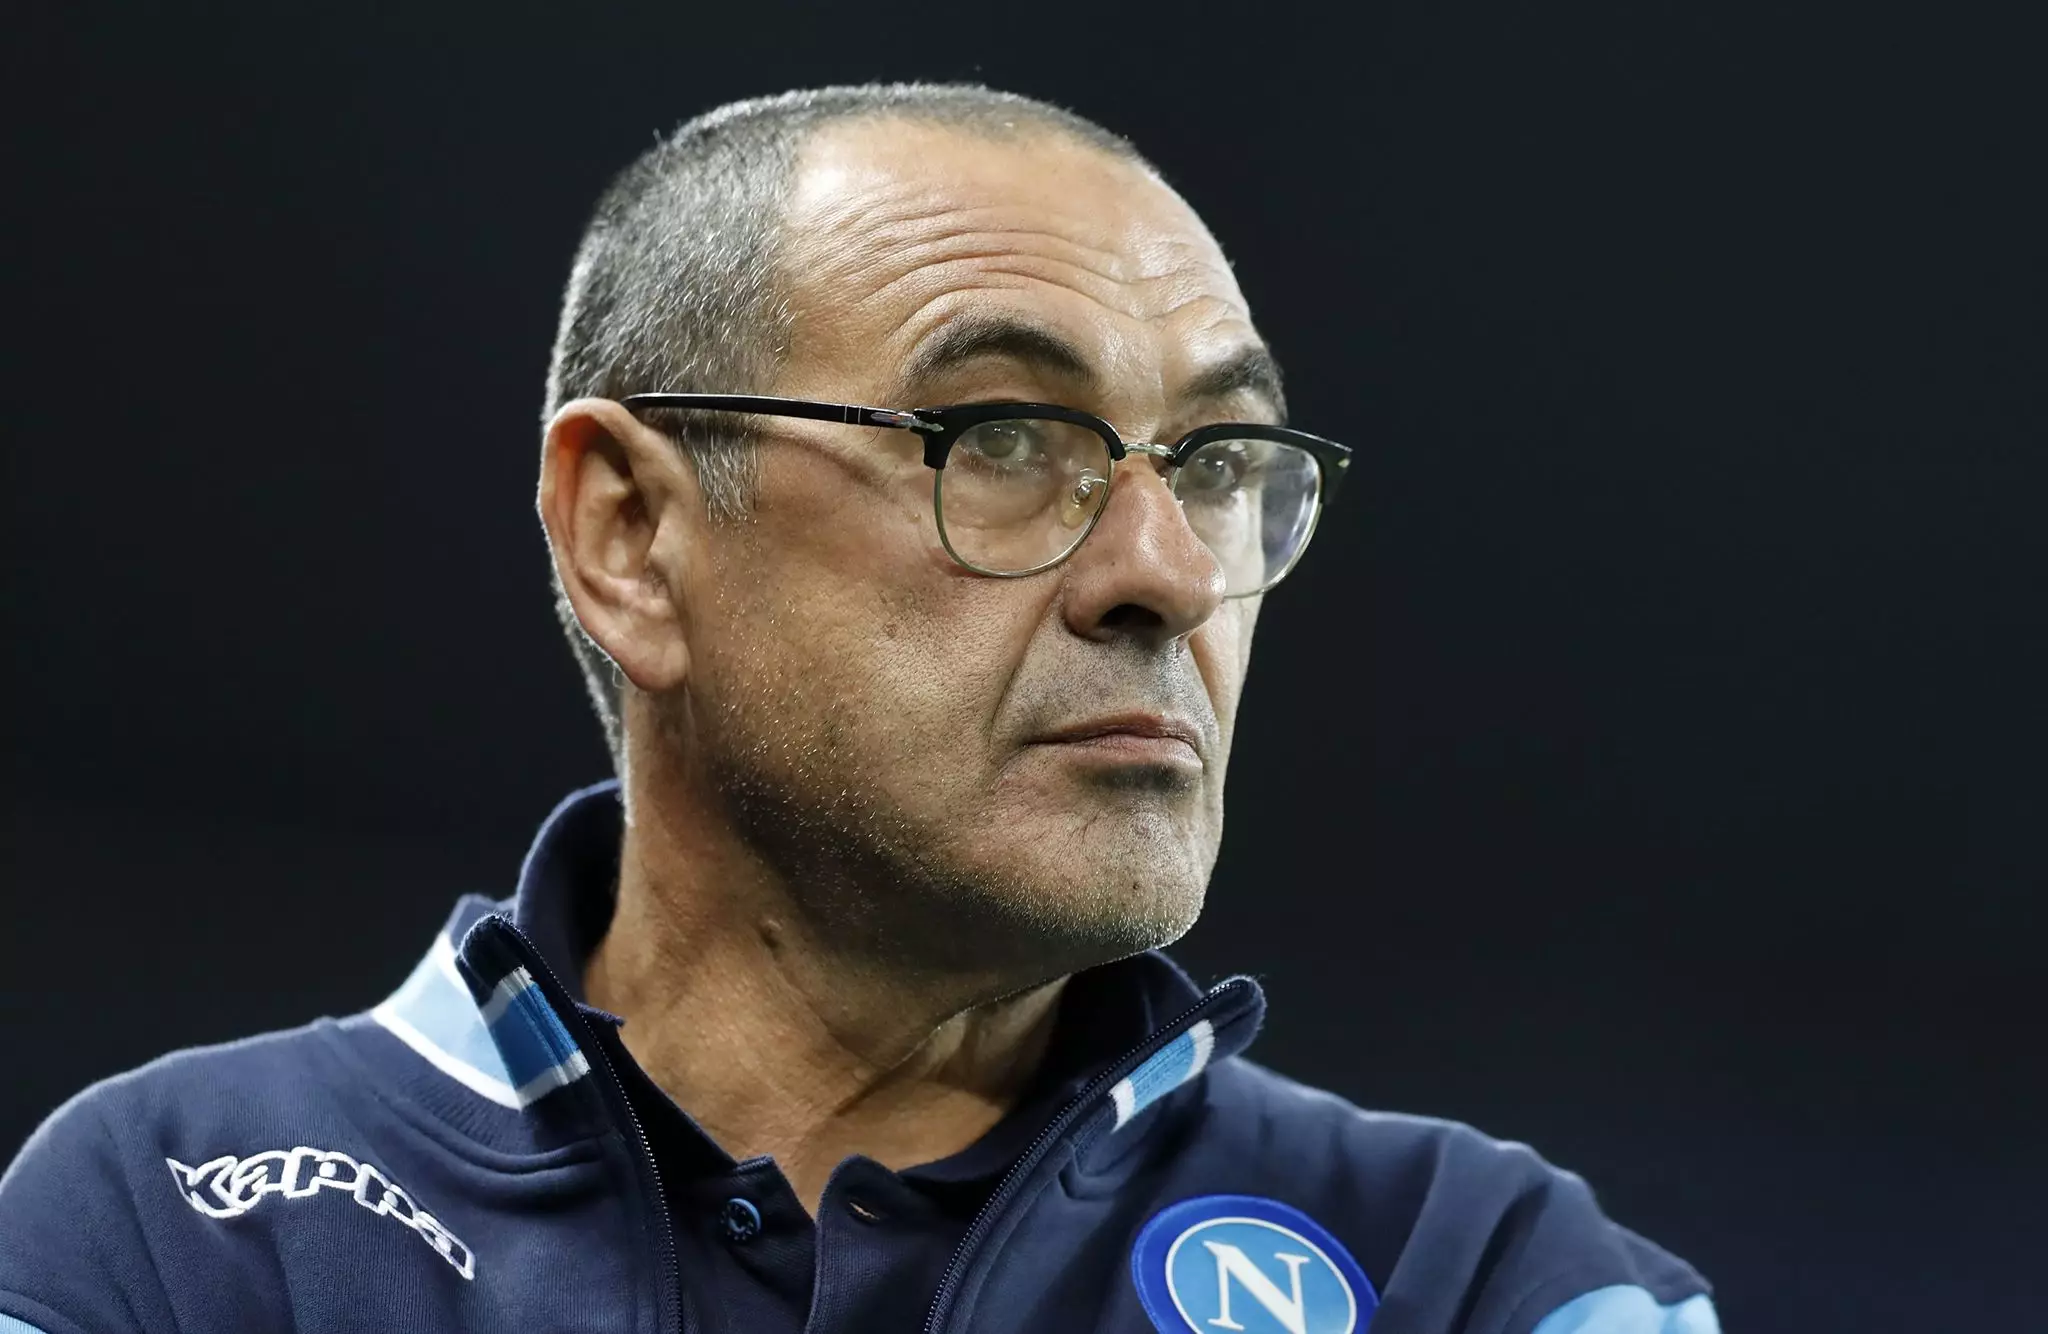 Sarri is expected to take over after Carlo Ancelotti was given the Napoli job. Image: PA Images